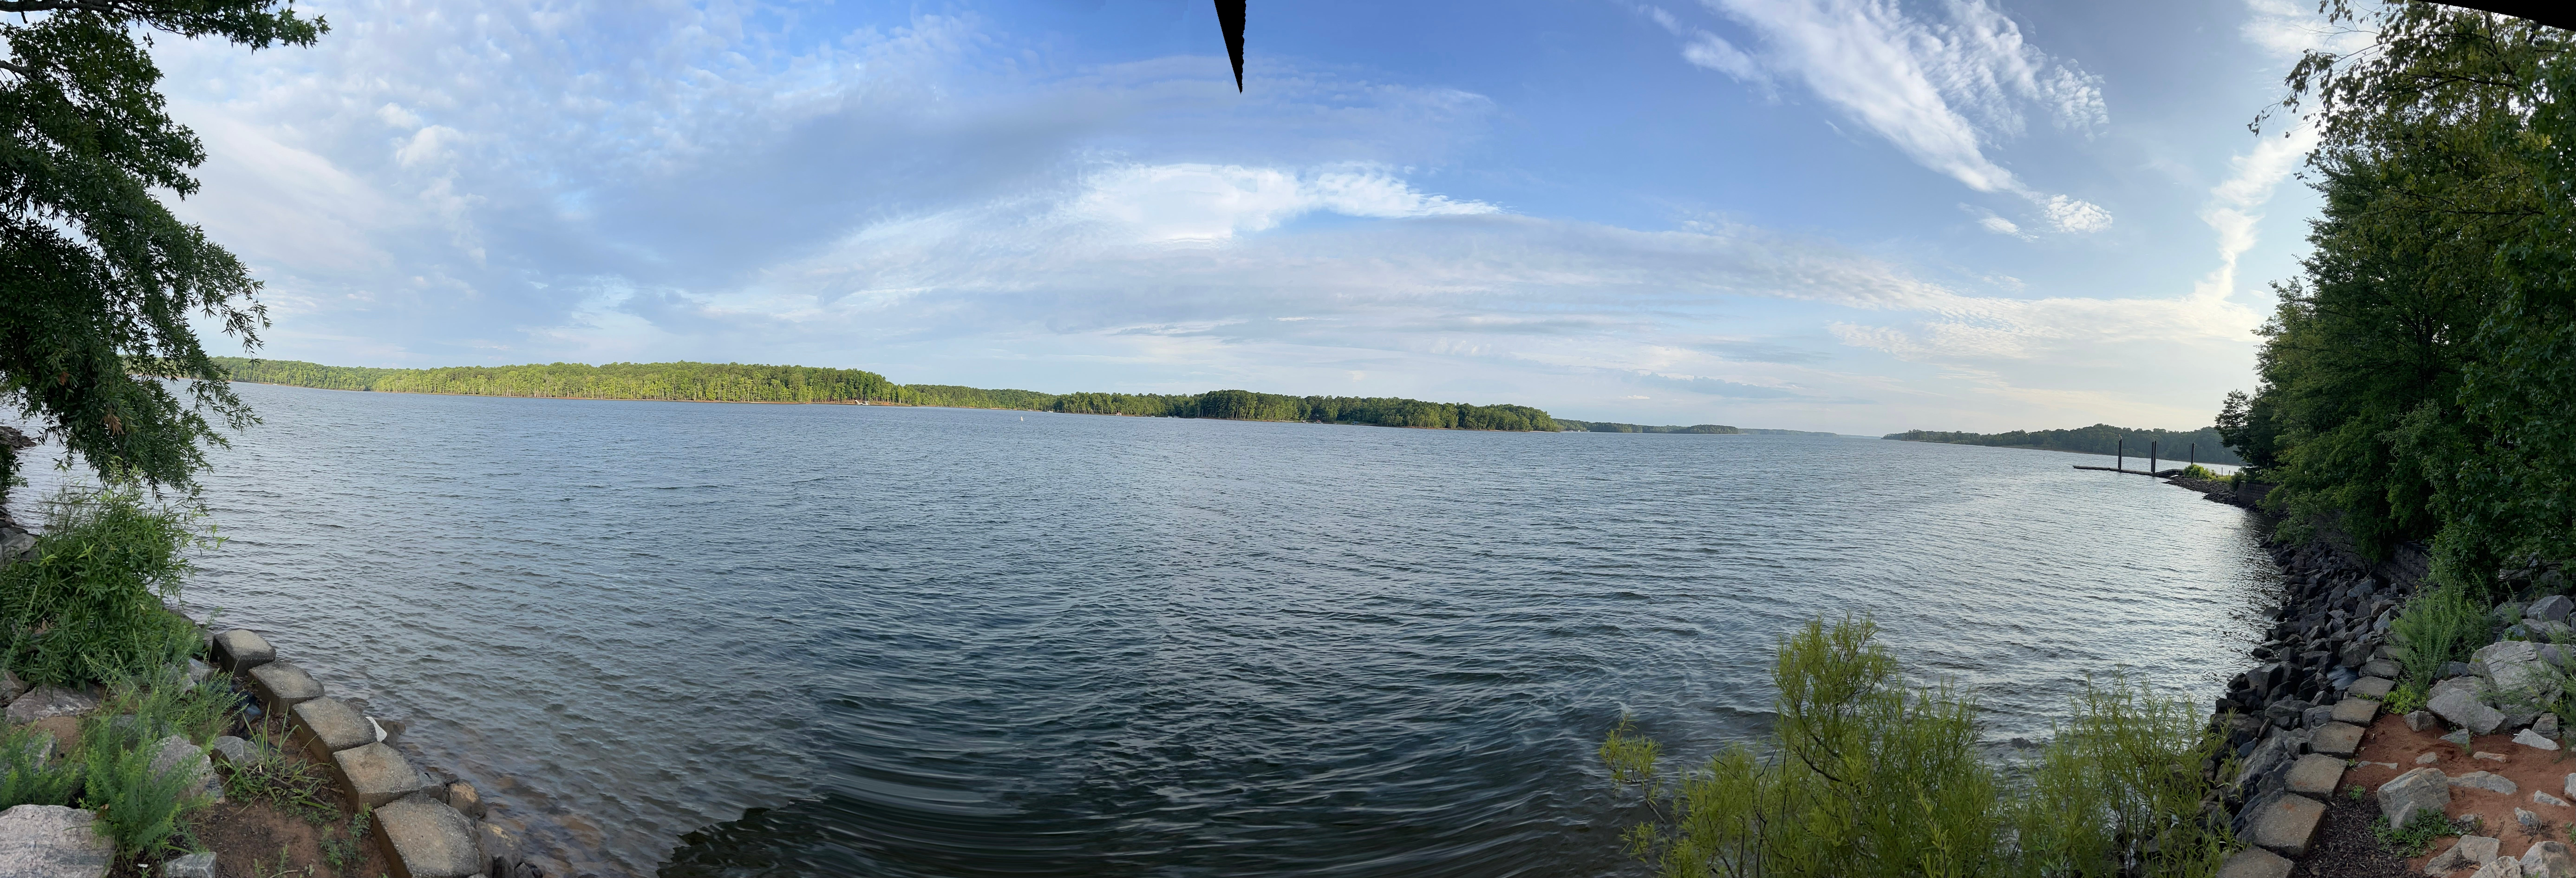 Camper submitted image from Satterwhite — Kerr Lake State Recreation Area - 4